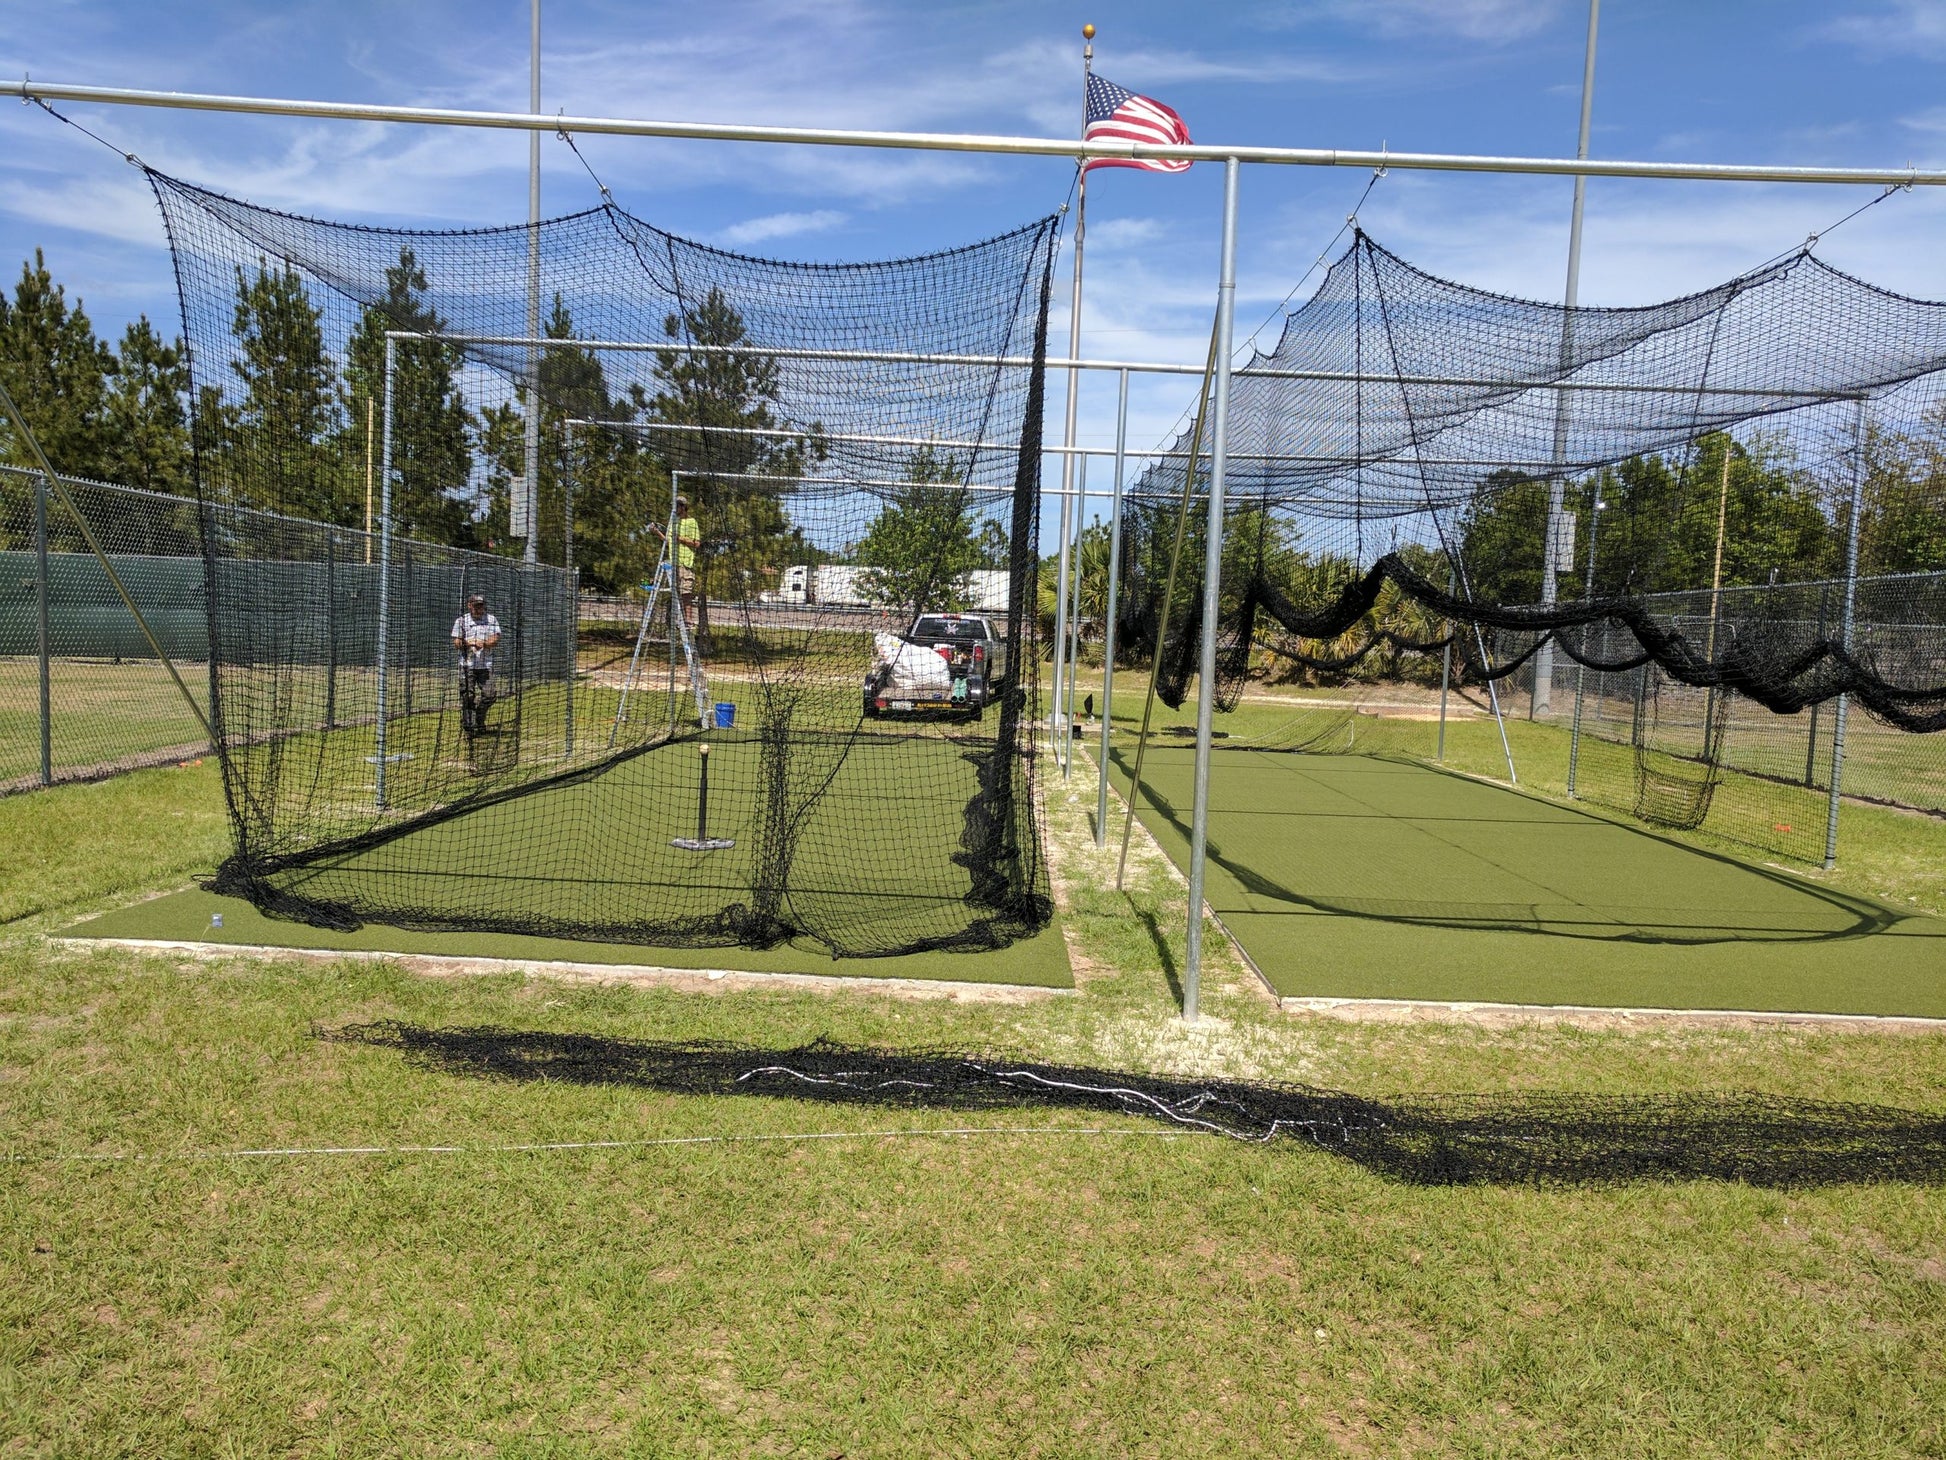 A baseball field with many batting cages in it